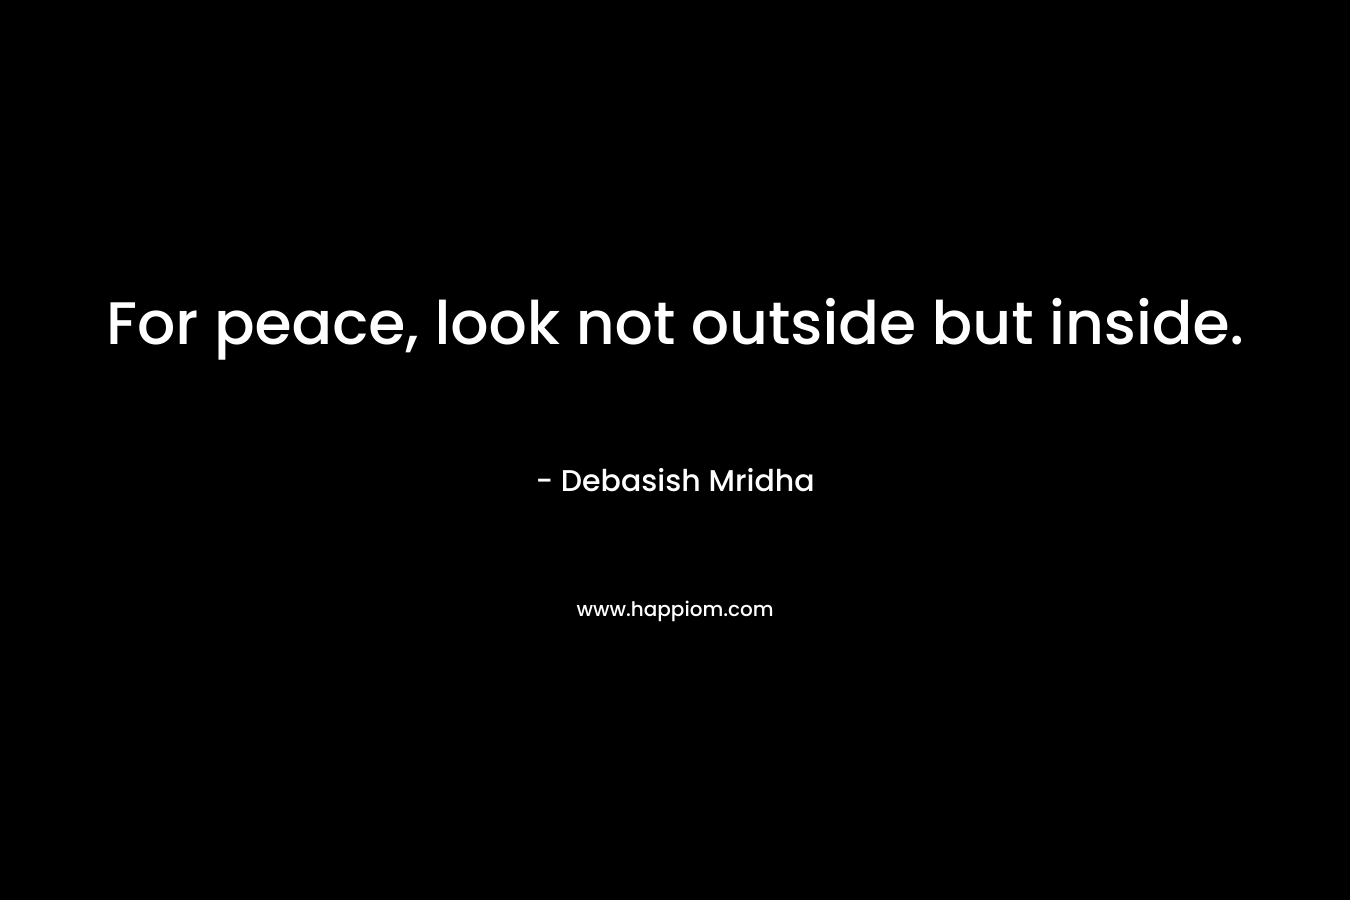 For peace, look not outside but inside.